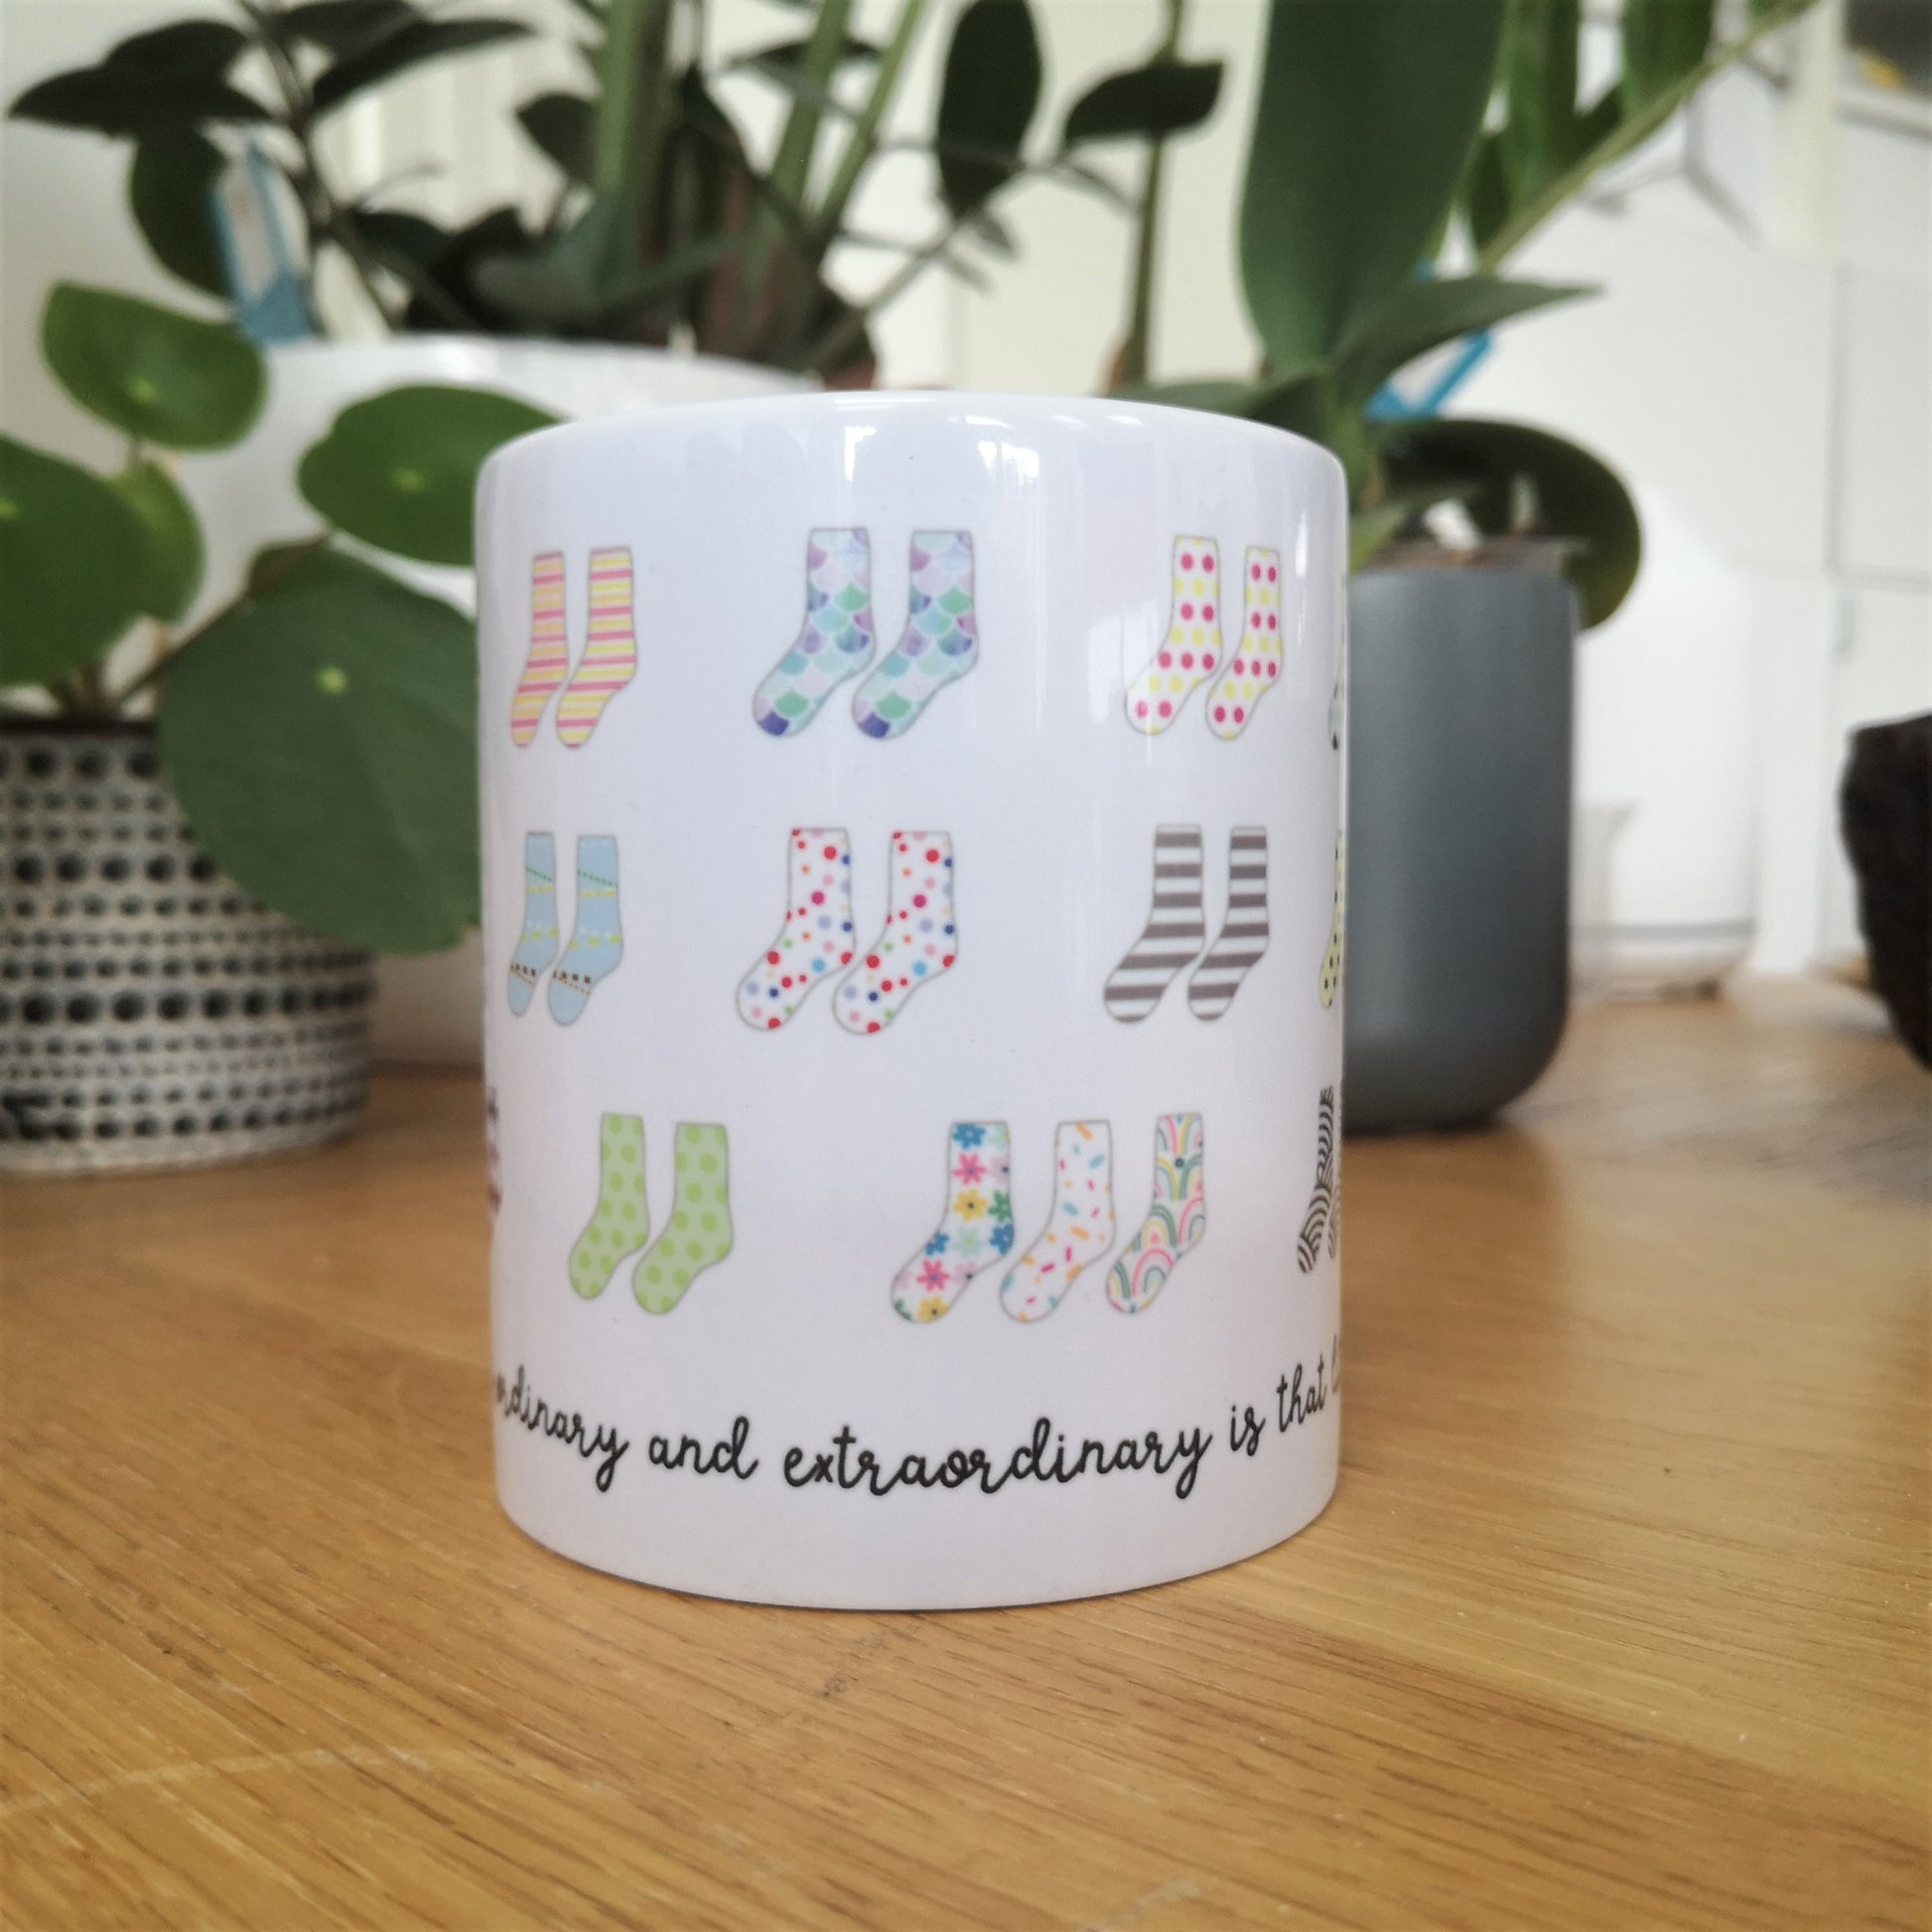 A mug that celebrates Down Syndrome and how it is the result of having 47 chromosomes instead of 46.  Each colourful pair of socks represents the 44 chromosomes we all have, but pair 21 has 3 socks instead of 2.